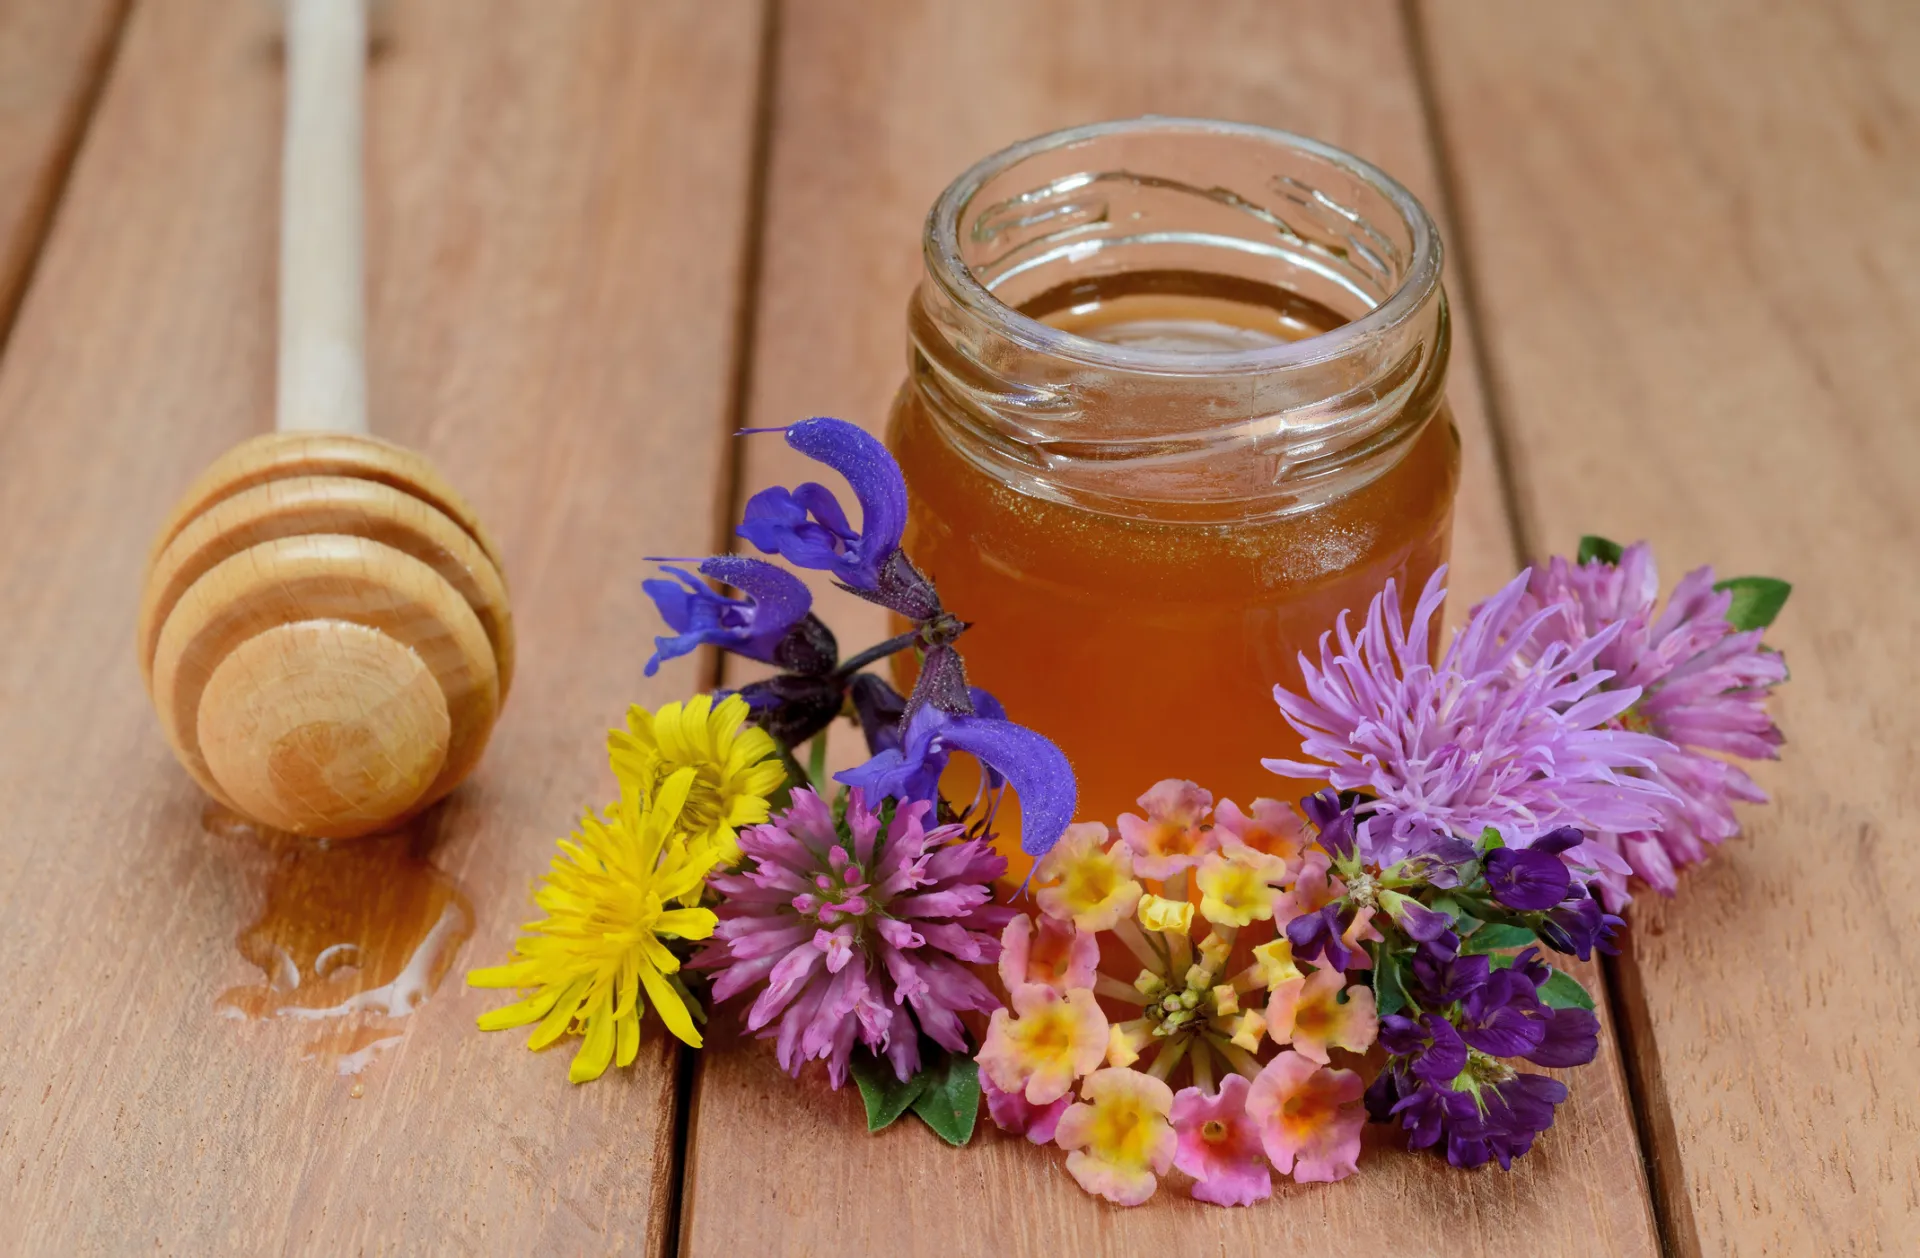 Polyflora honey from the Carpathian mountains